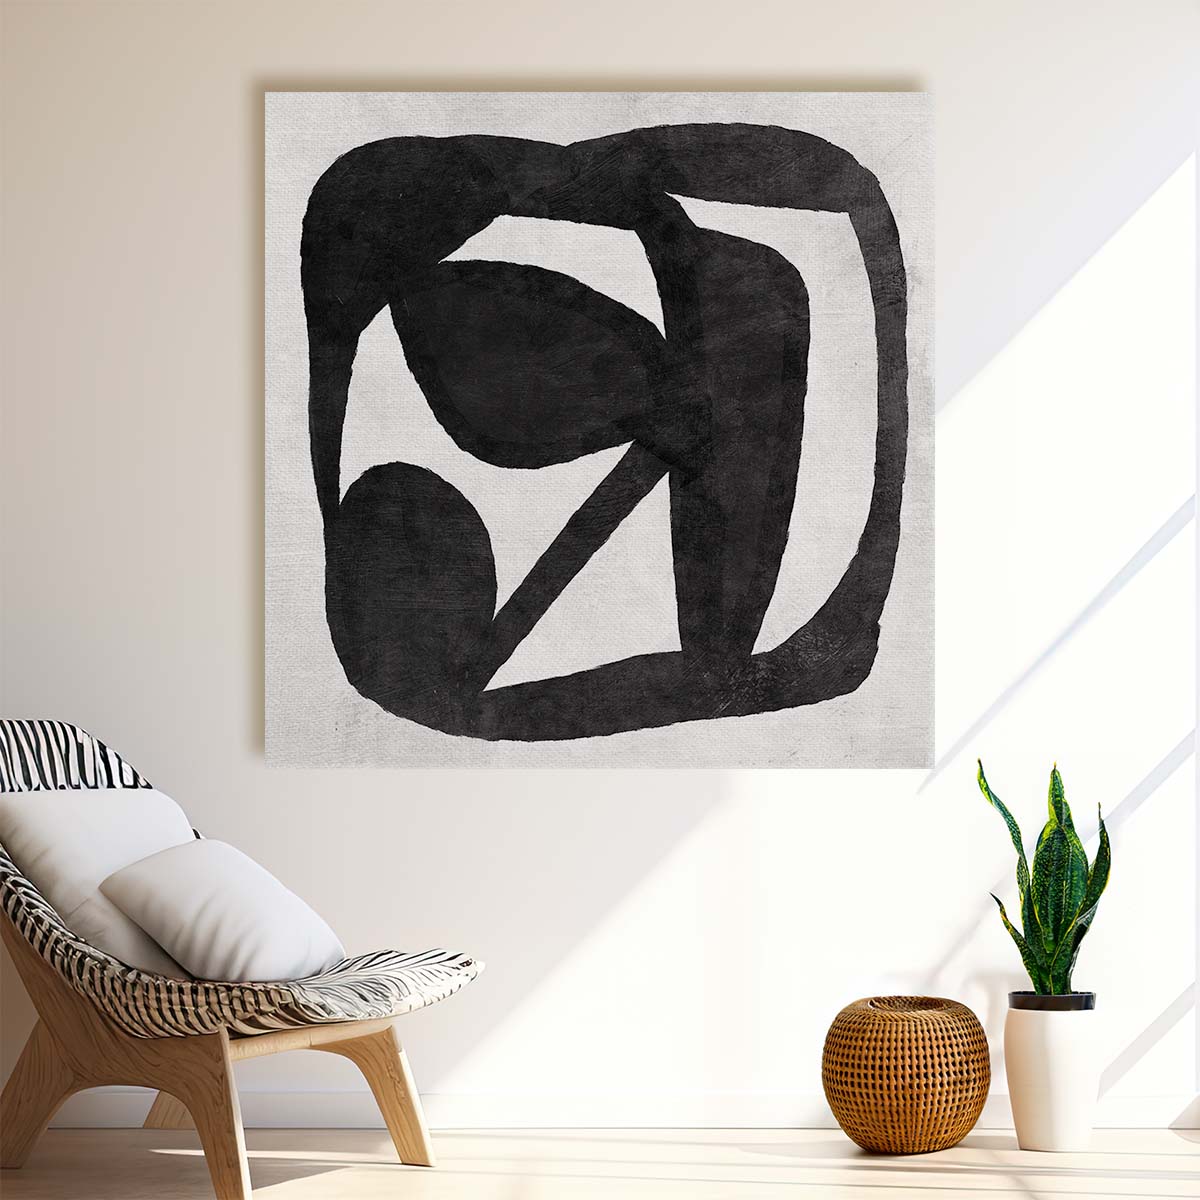 Dan Hobday Modern Minimalist Abstract Melody Brush Stroke Illustration Wall Art by Luxuriance Designs. Made in USA.